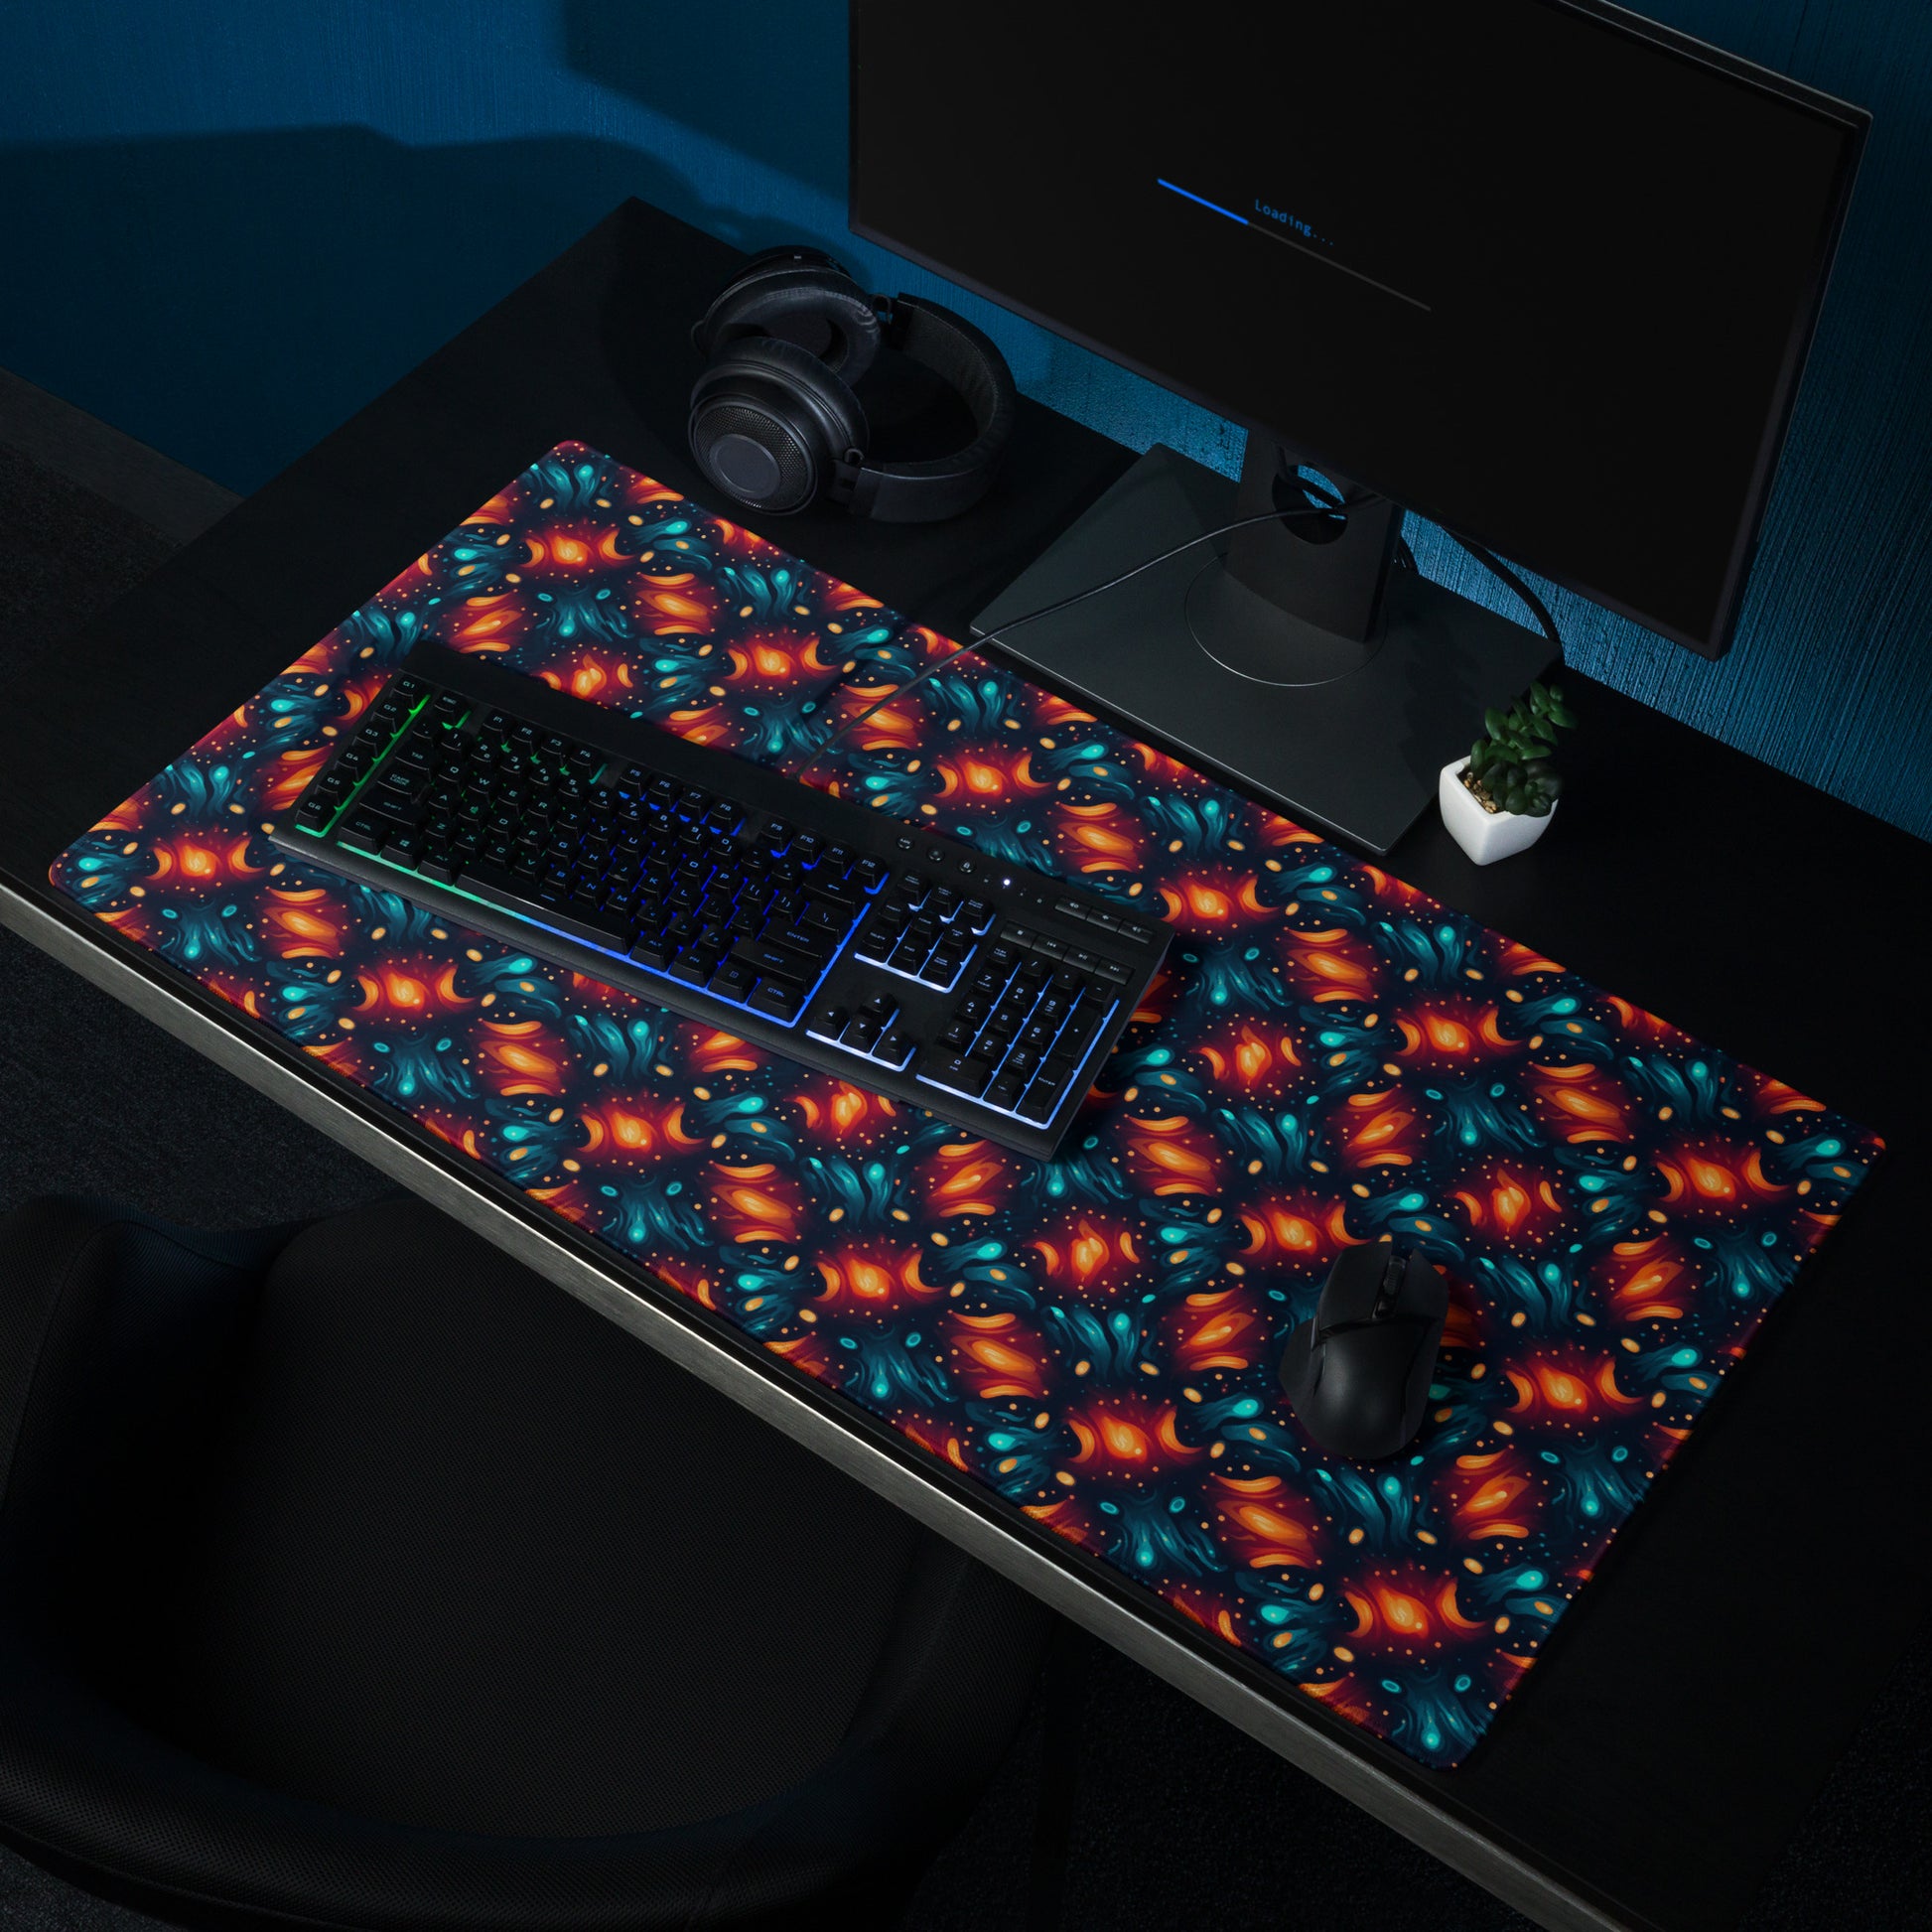 A 36" x 18" desk pad with a blue and orange abstract cross hatch pattern sitting on a desk.